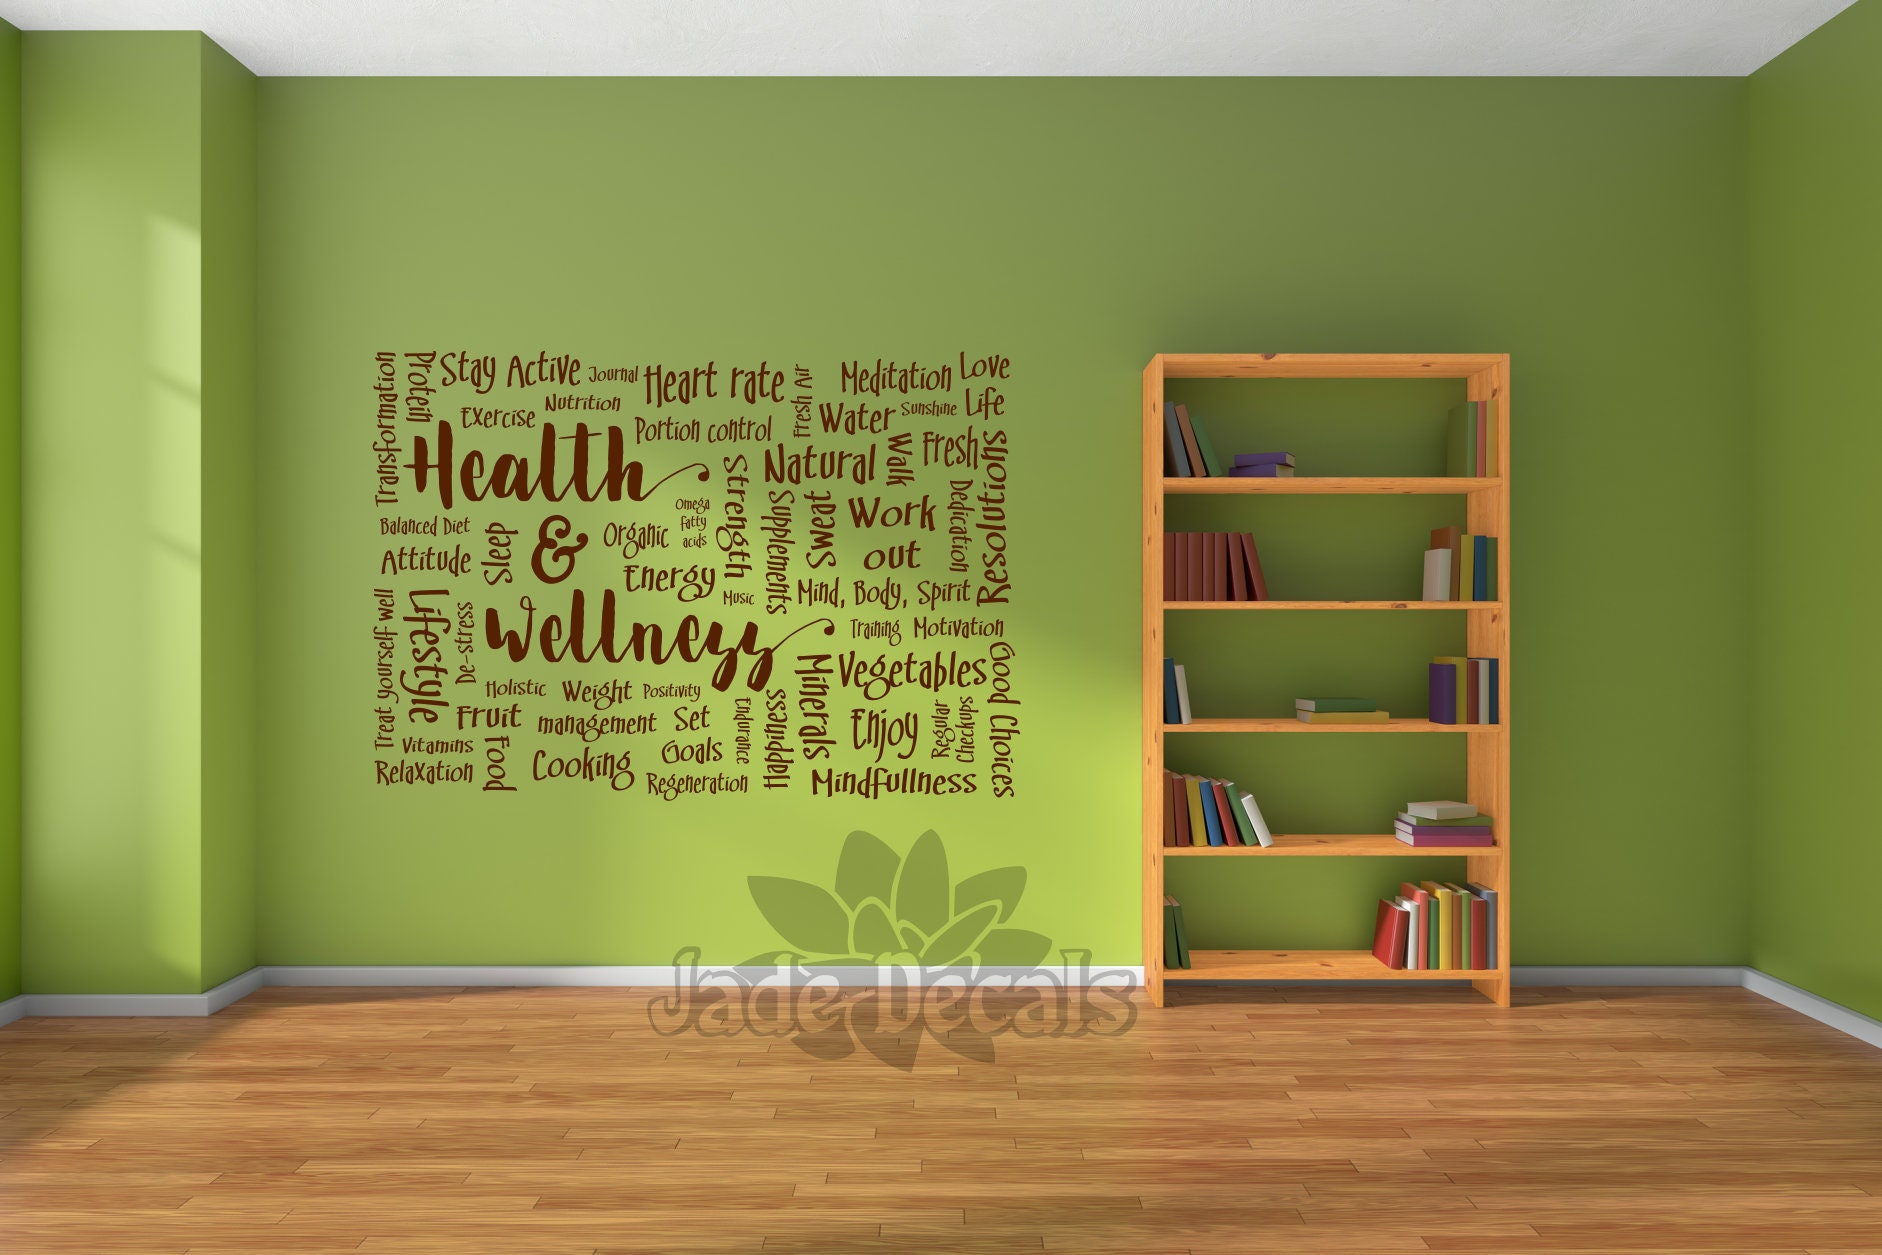 Health and Beauty Wall Stickers for Businesses - TenStickers